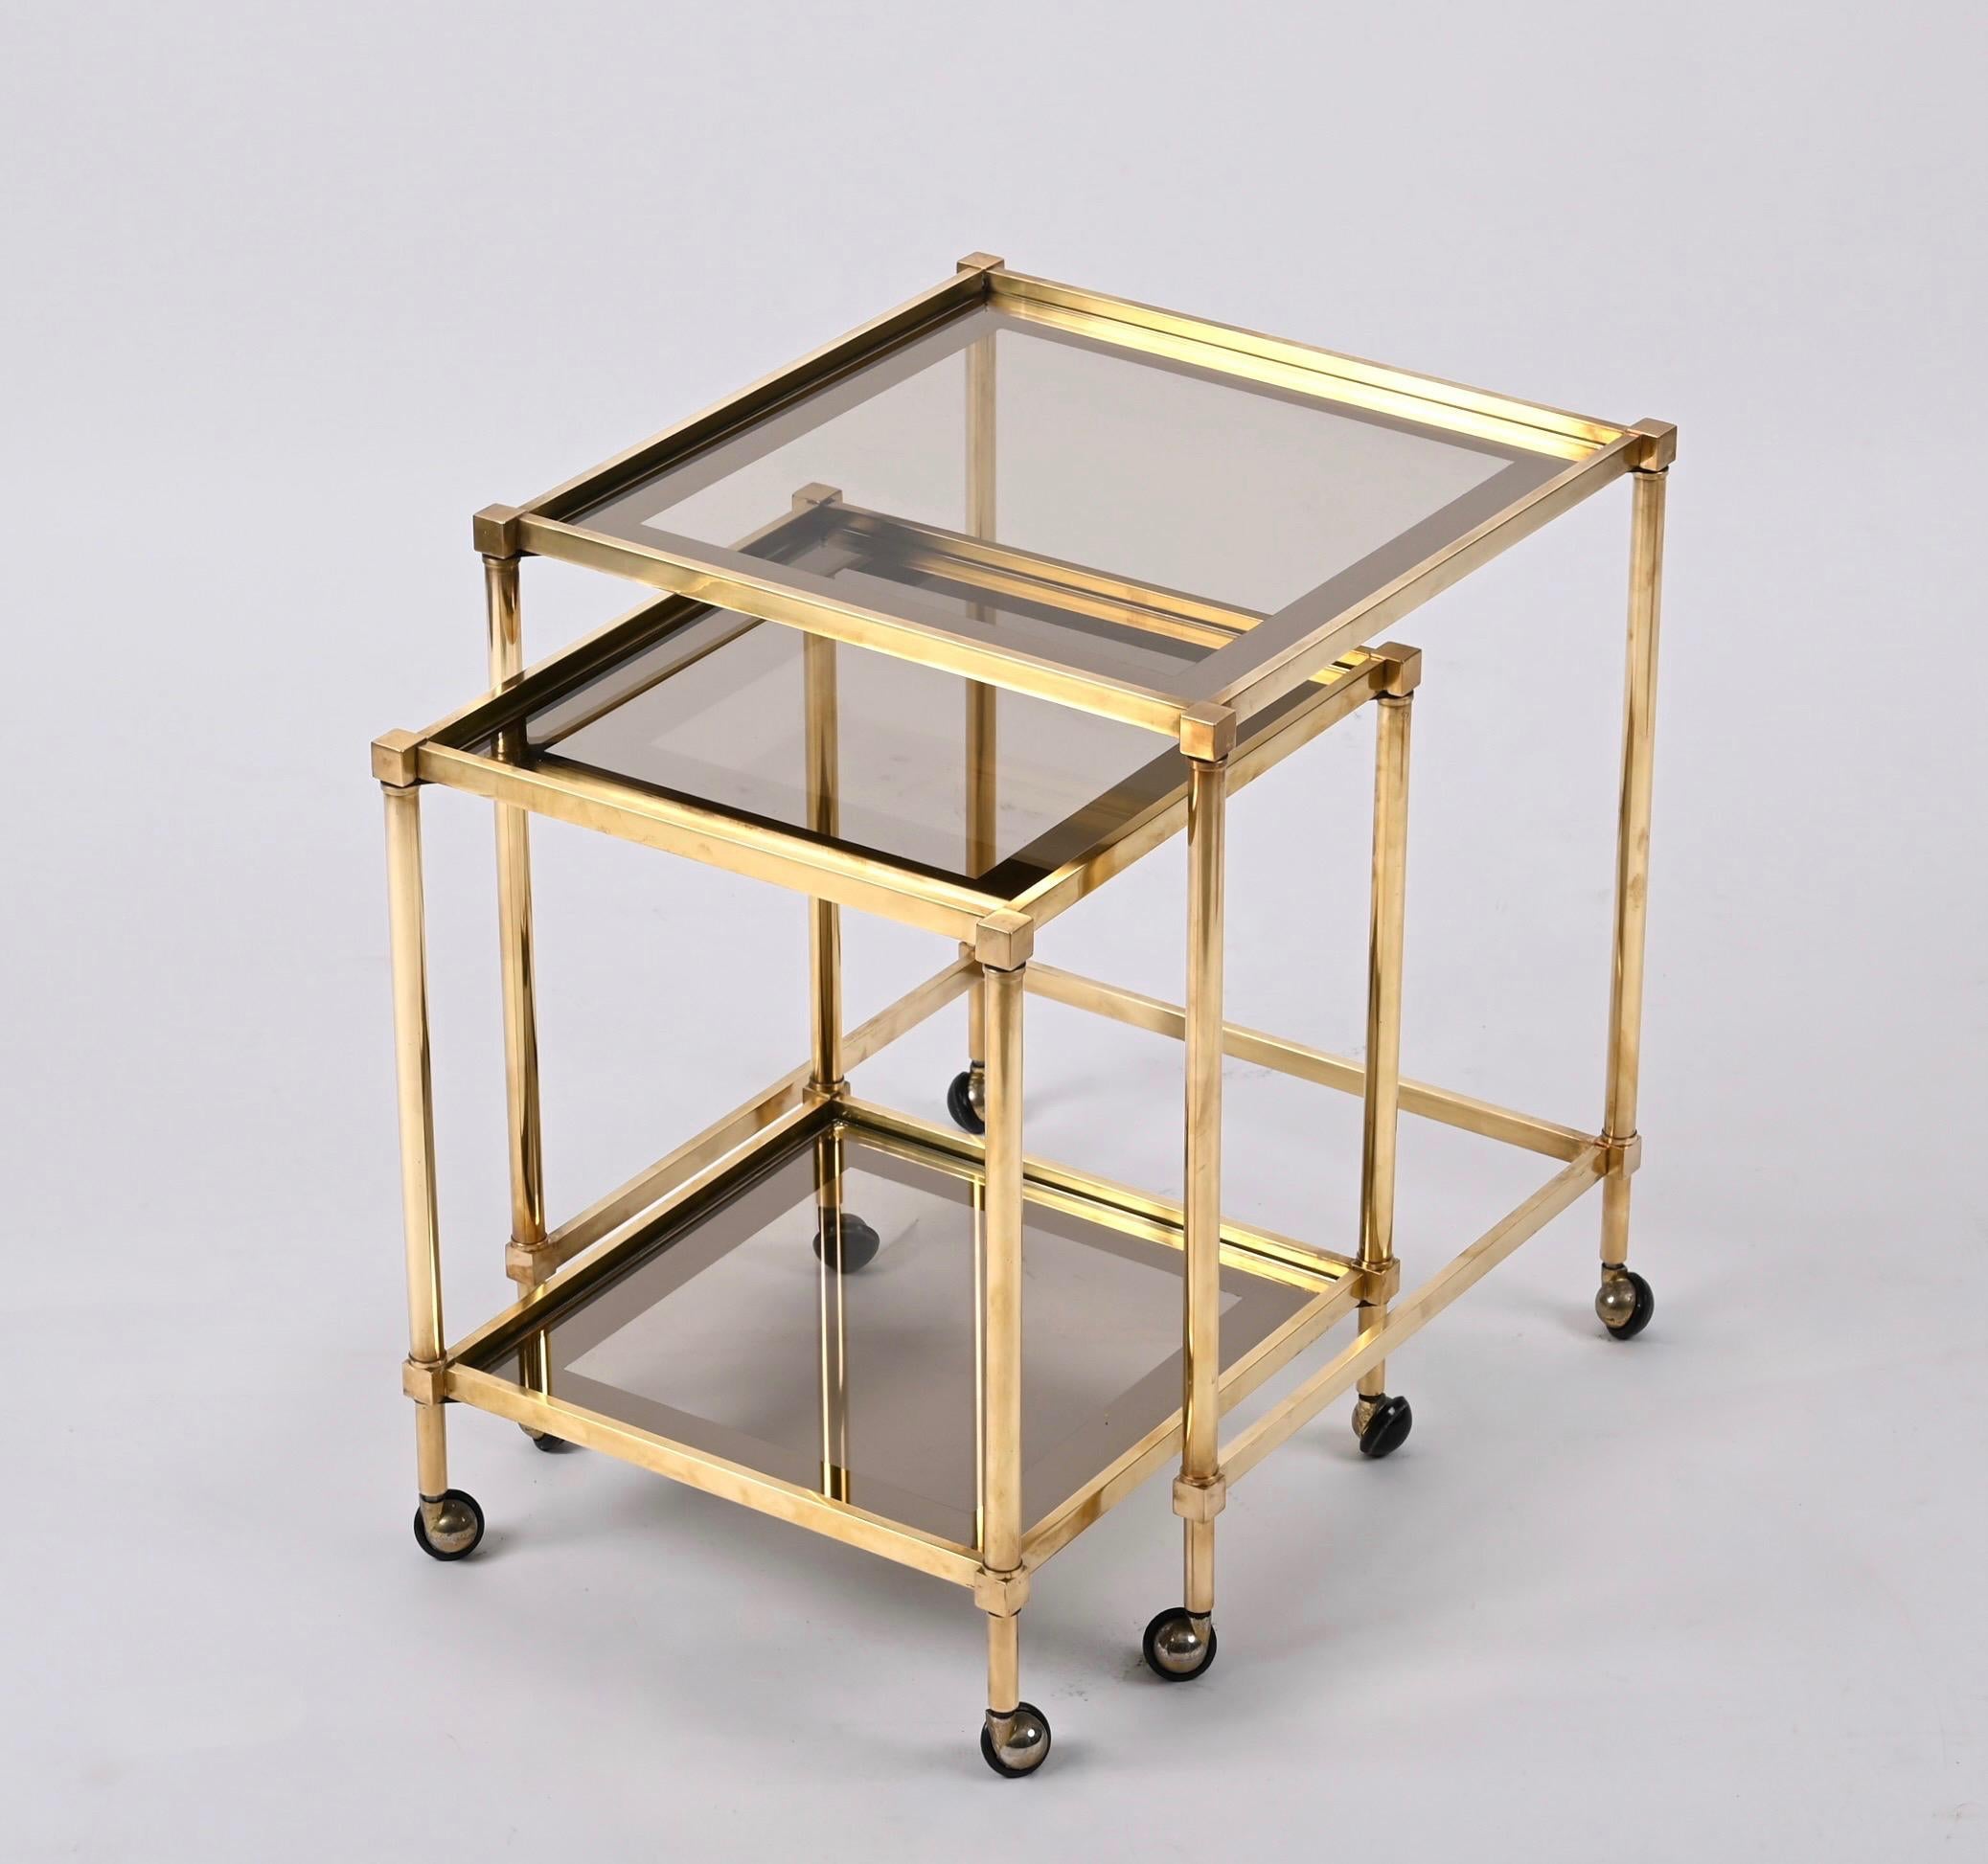 Pair of Maison Jansen Brass Mirrored Border Nesting Tables with Glass Top, 1970s For Sale 3